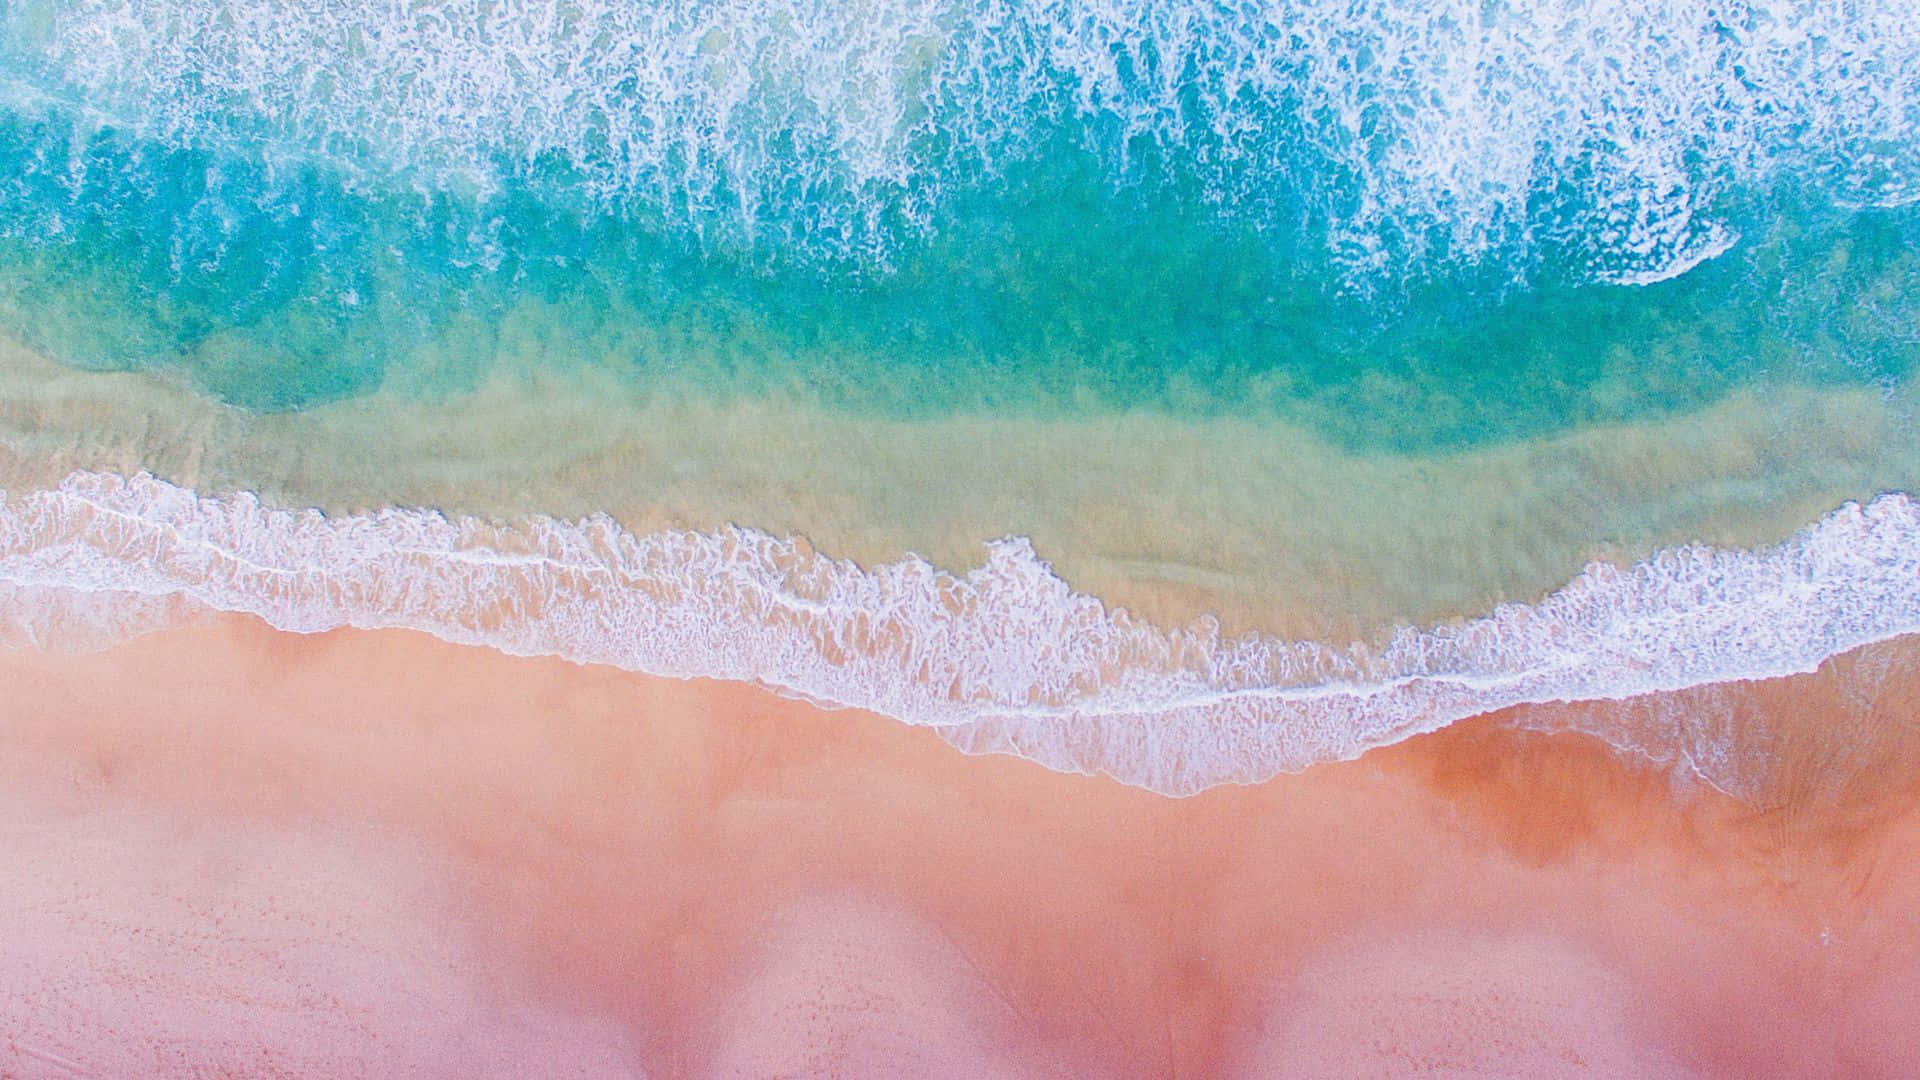 A breathtaking view of Pink Beach, where turquoise waters meet rosy sands. Wallpaper